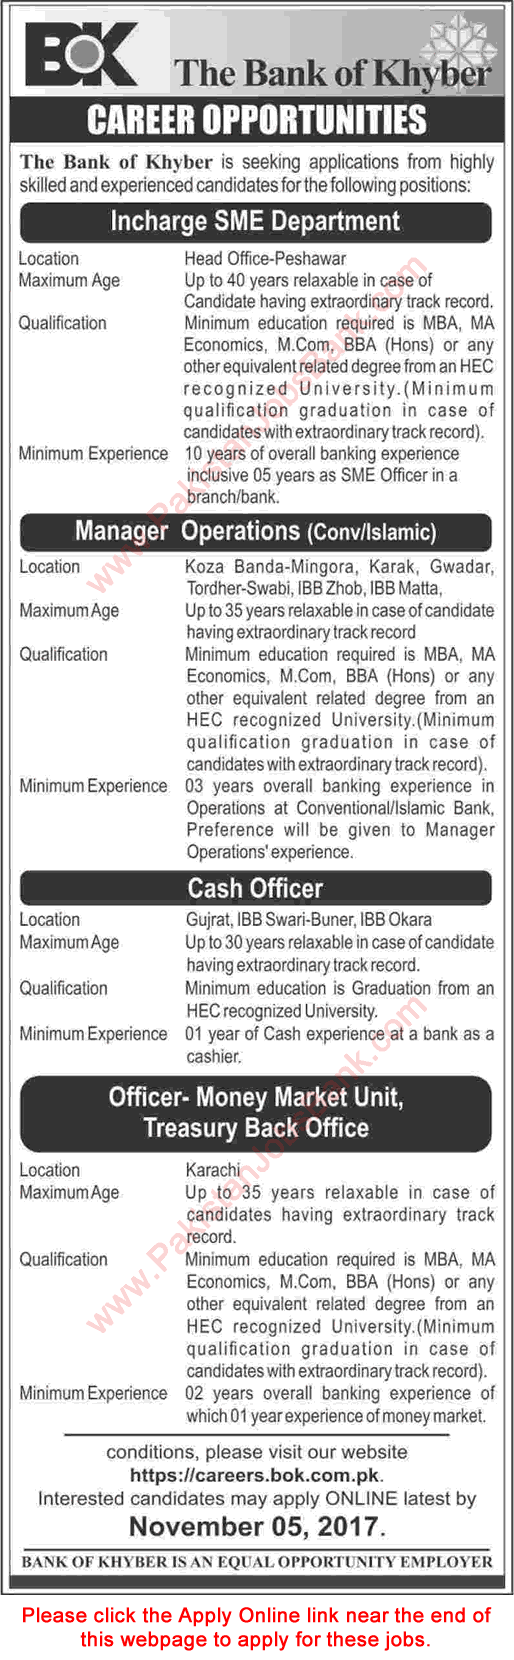 Bank of Khyber Jobs October 2017 Apply Online Cash Officers, Operations Manager & Others Latest